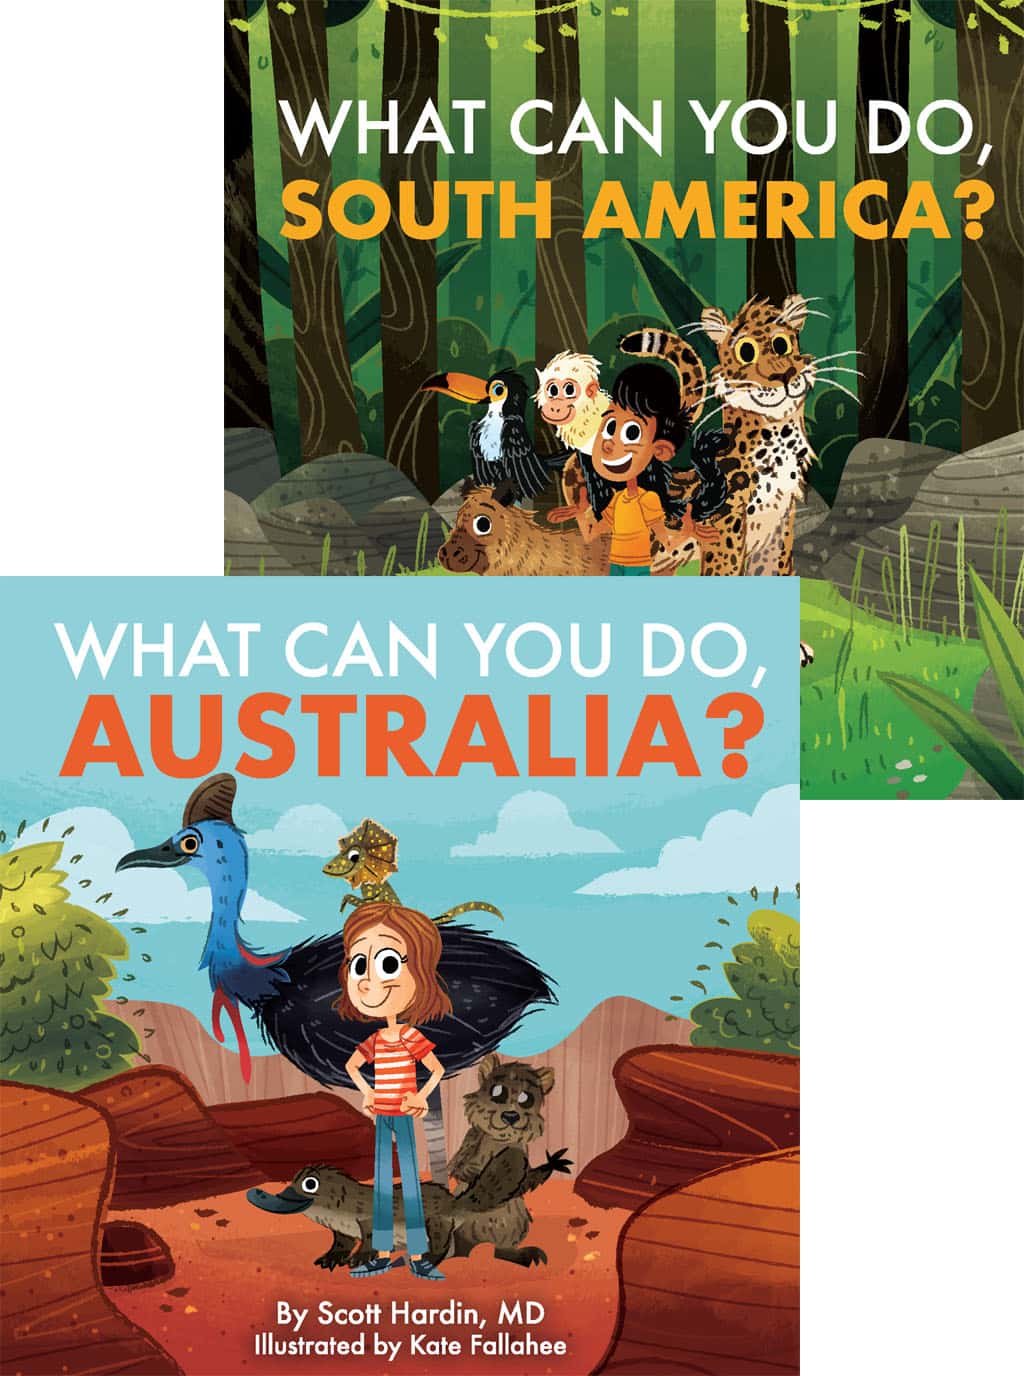 What Can You Do Australia and South America creation science for kids board book bundle cover